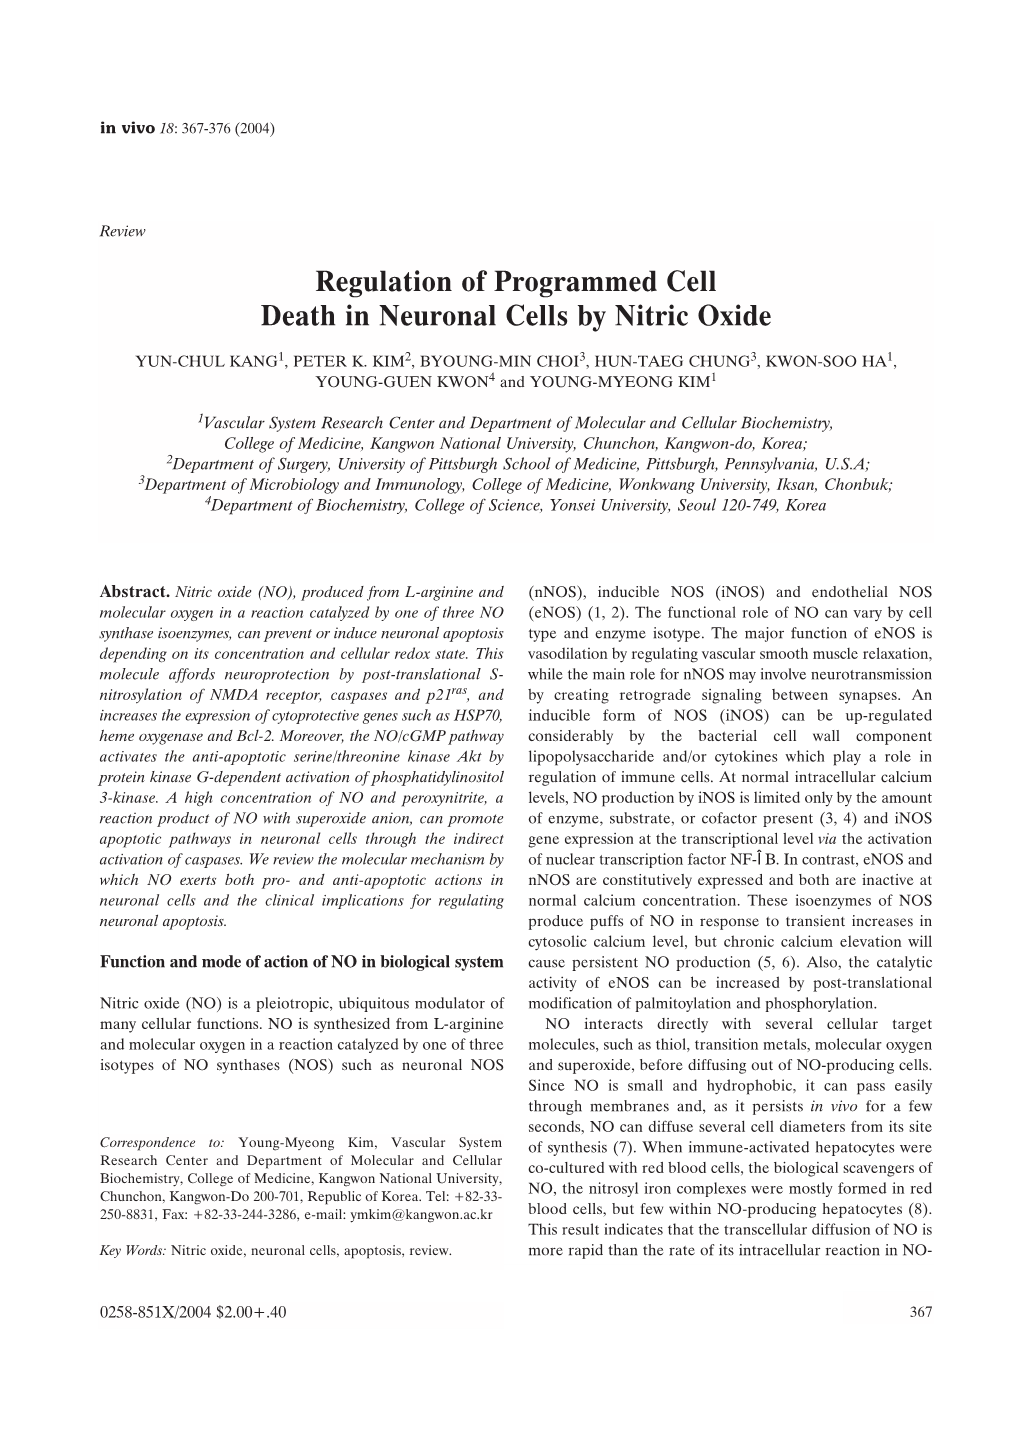 Regulation of Programmed Cell Death in Neuronal Cells by Nitric Oxide